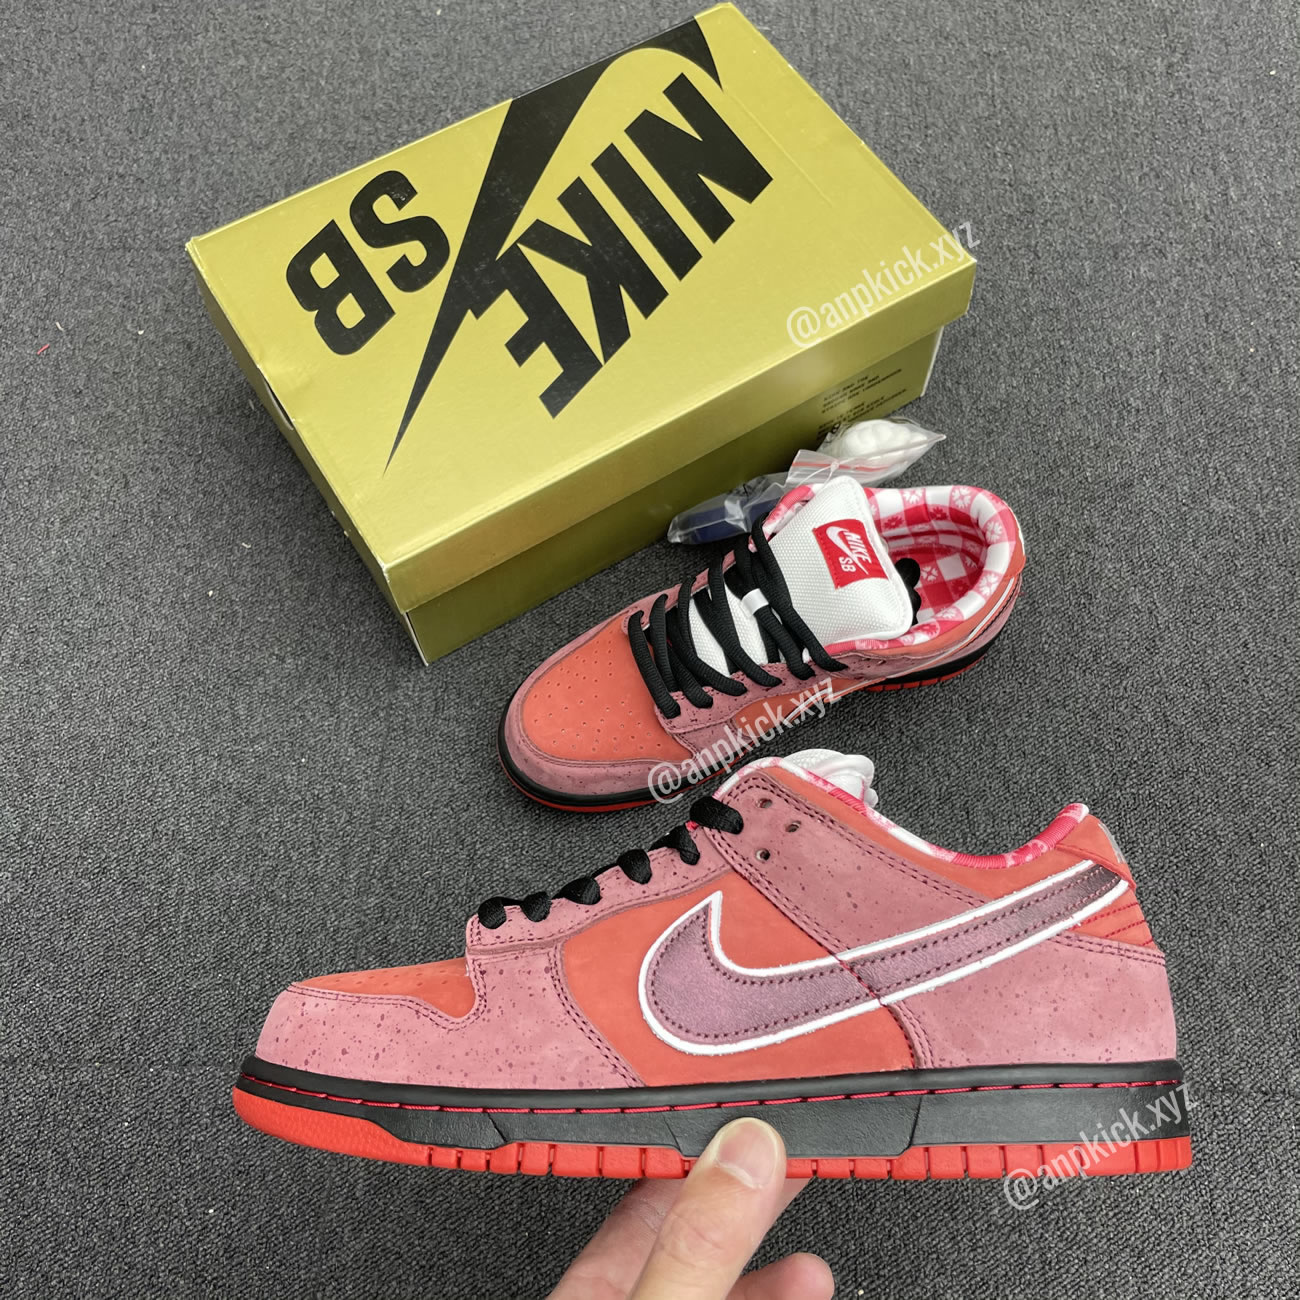 Anpkick Nike Sb Dunk Low Concepts Red Lobster 313170 661 (2) - newkick.org